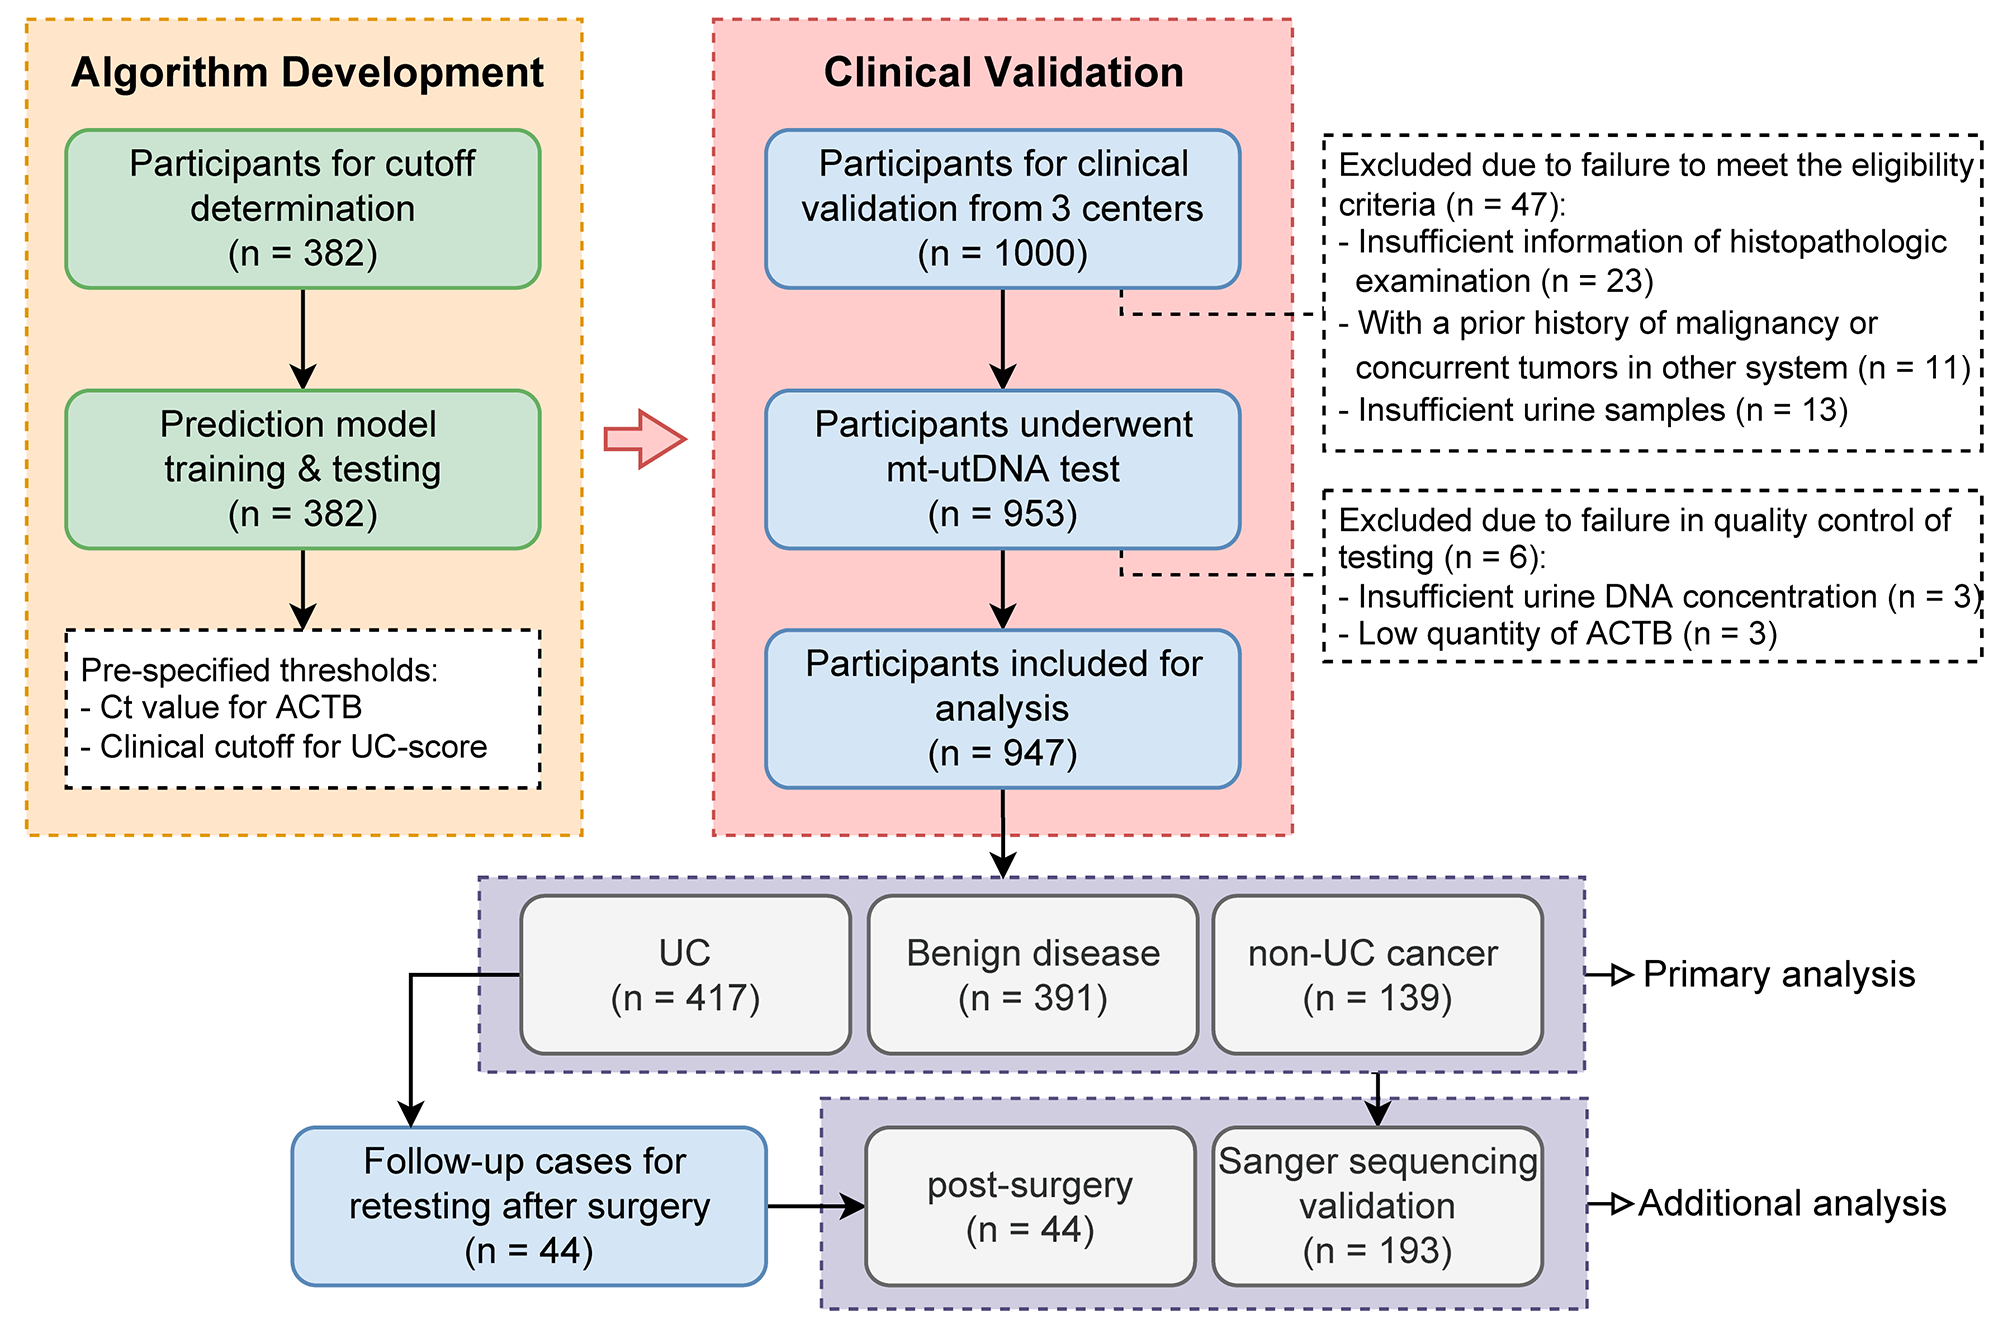 Clinical effectiveness of a multitarget urine DNA test for urothelial carcinoma detection: a double-blinded, multicenter, prospective trial